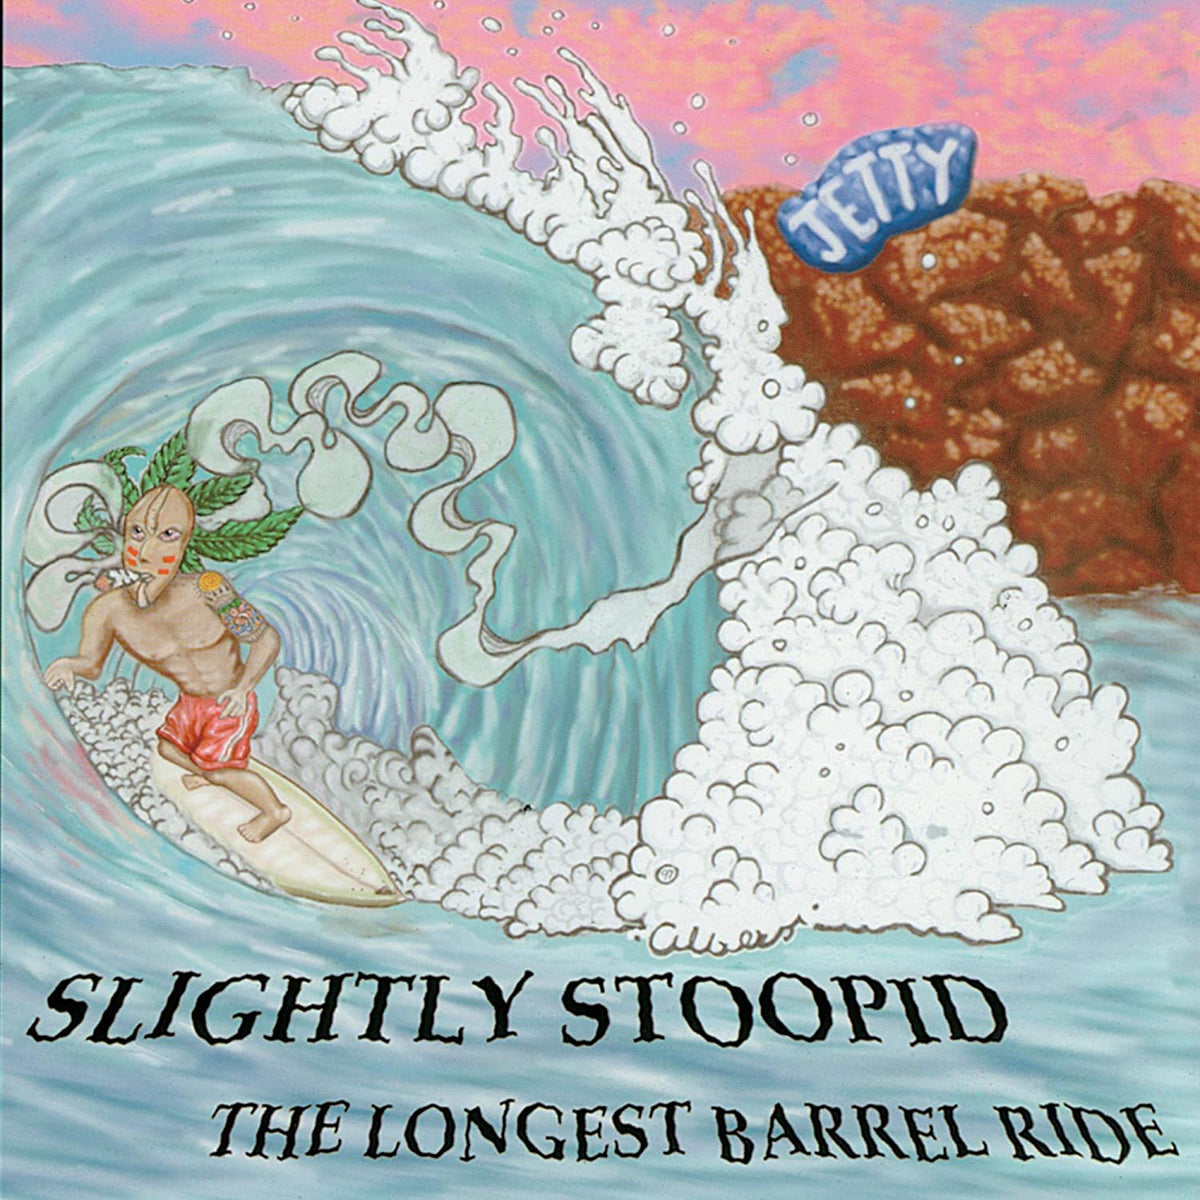 Slightly Stoopid - The Longest Barrel Ride 2LP (Colored Vinyl, Blue, Limited Edition, Reissue)